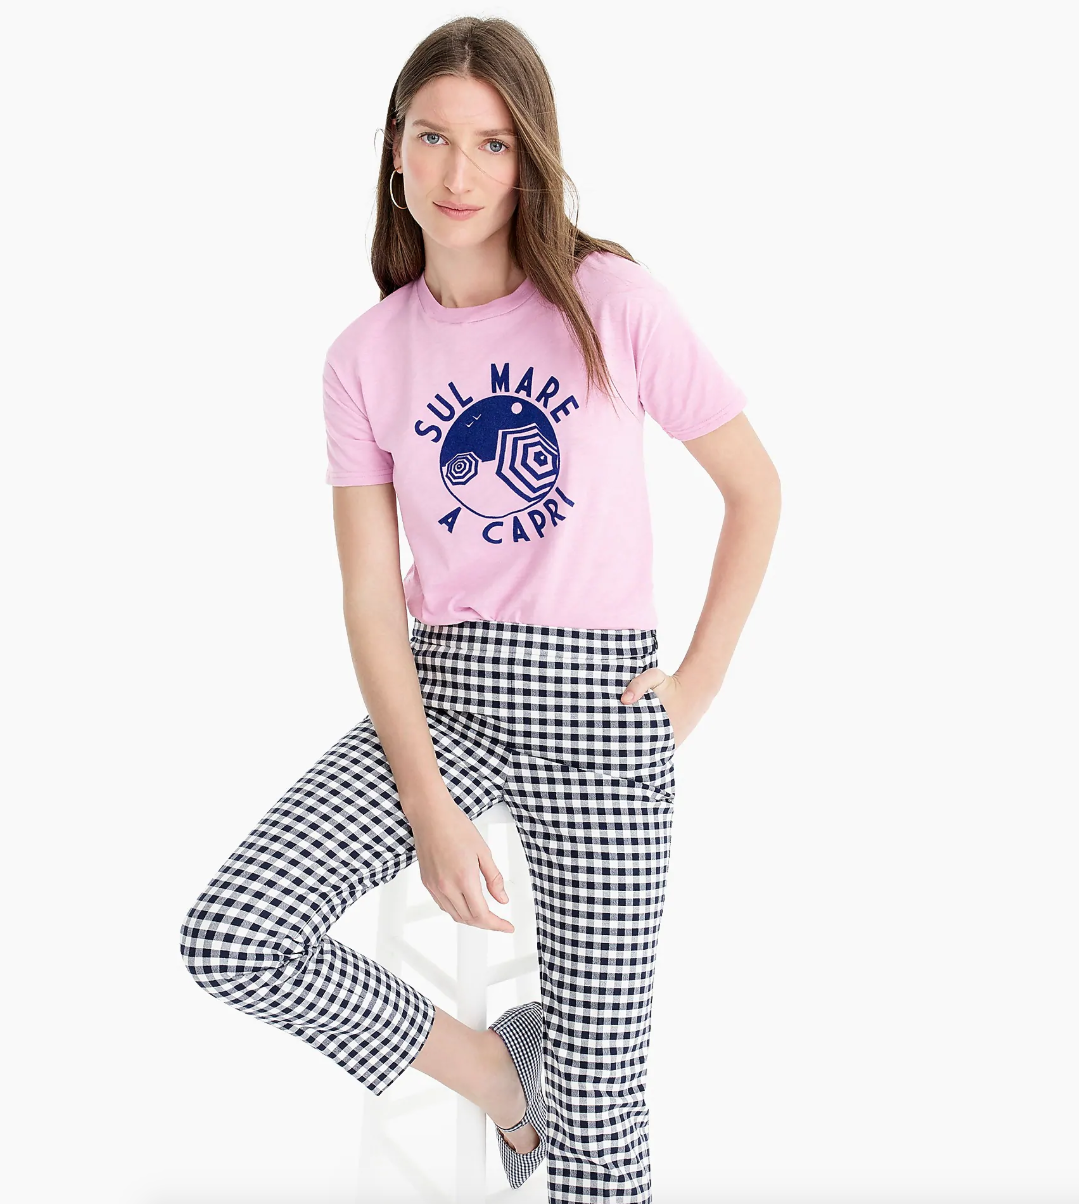 Camilla Atkins, CATKINS DESIGN for J. Crew Spring 2019, Italy screen printed tee shirt- women's apparel.png